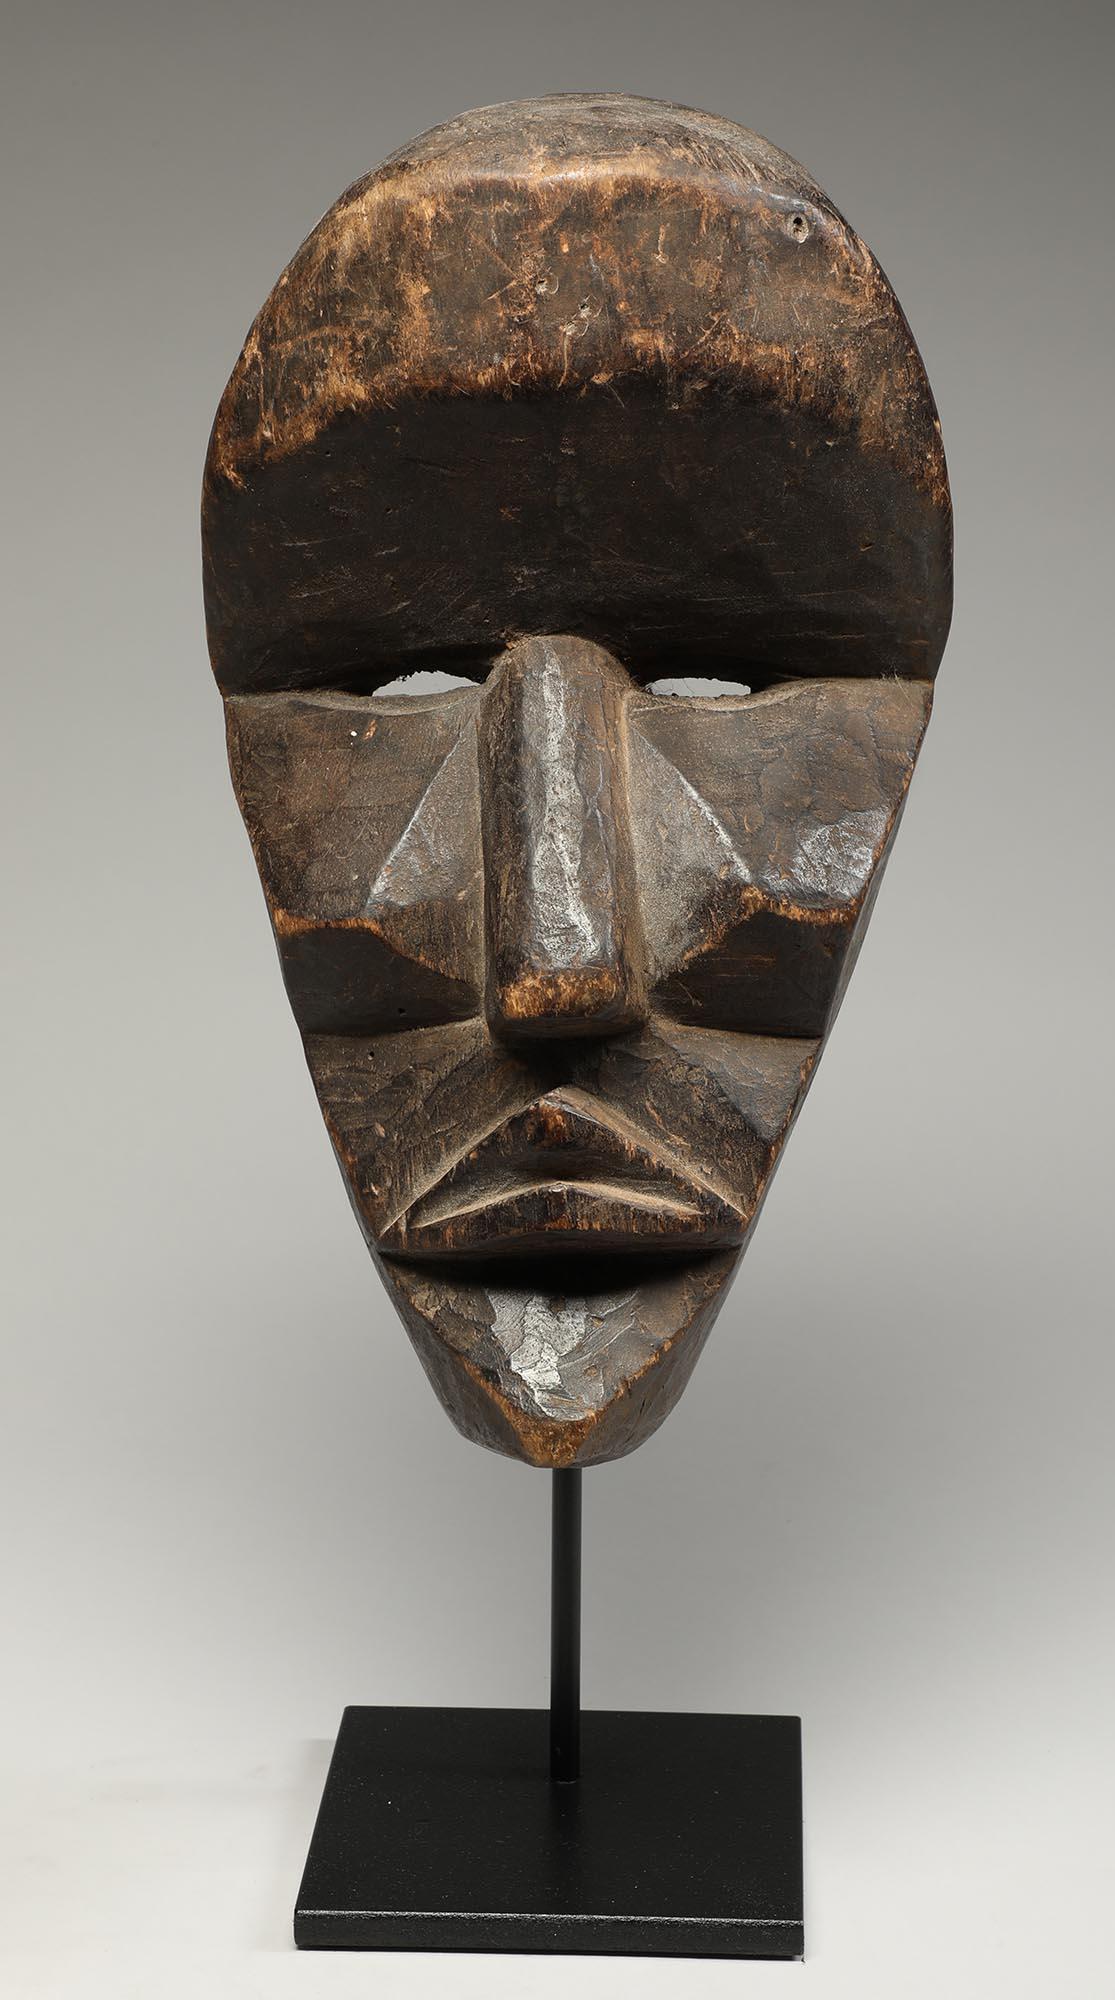 A very large old cubist Dan wood mask with strong expressive look, angular cheeks, with powerfully carved mouth. Created early 20th century by the Dan People of Liberia and Cote d'Ivoire. Ex old estate in Washington DC, ex private collection So.